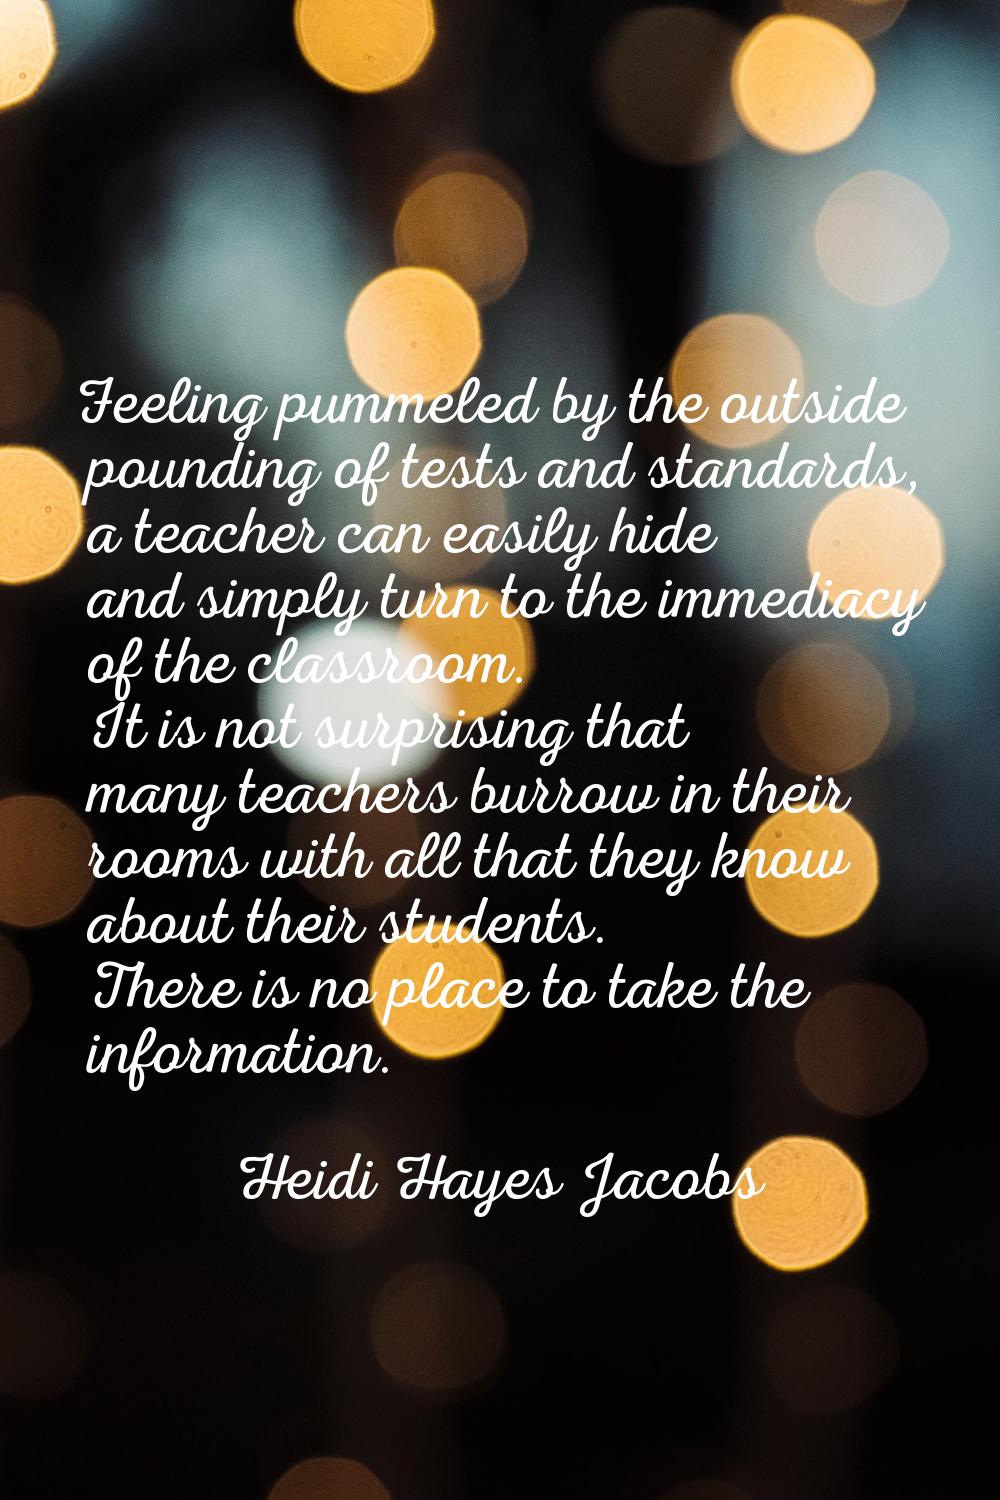 Feeling pummeled by the outside pounding of tests and standards, a teacher can easily hide and simp